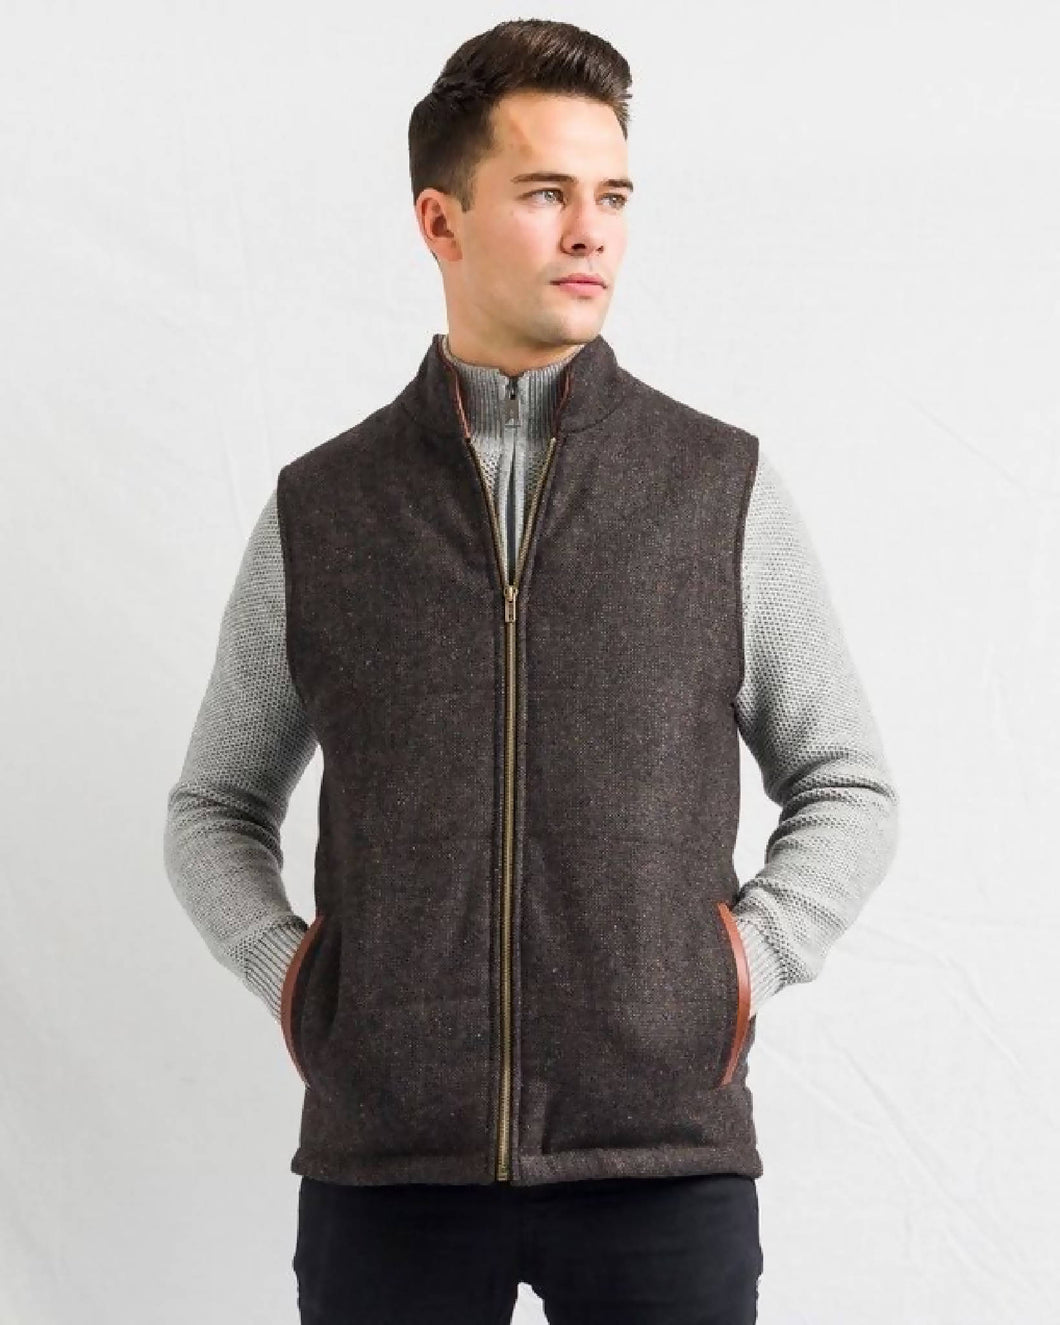 Men's Brown Tweed Body Warmer And Gilet With Leather Trims